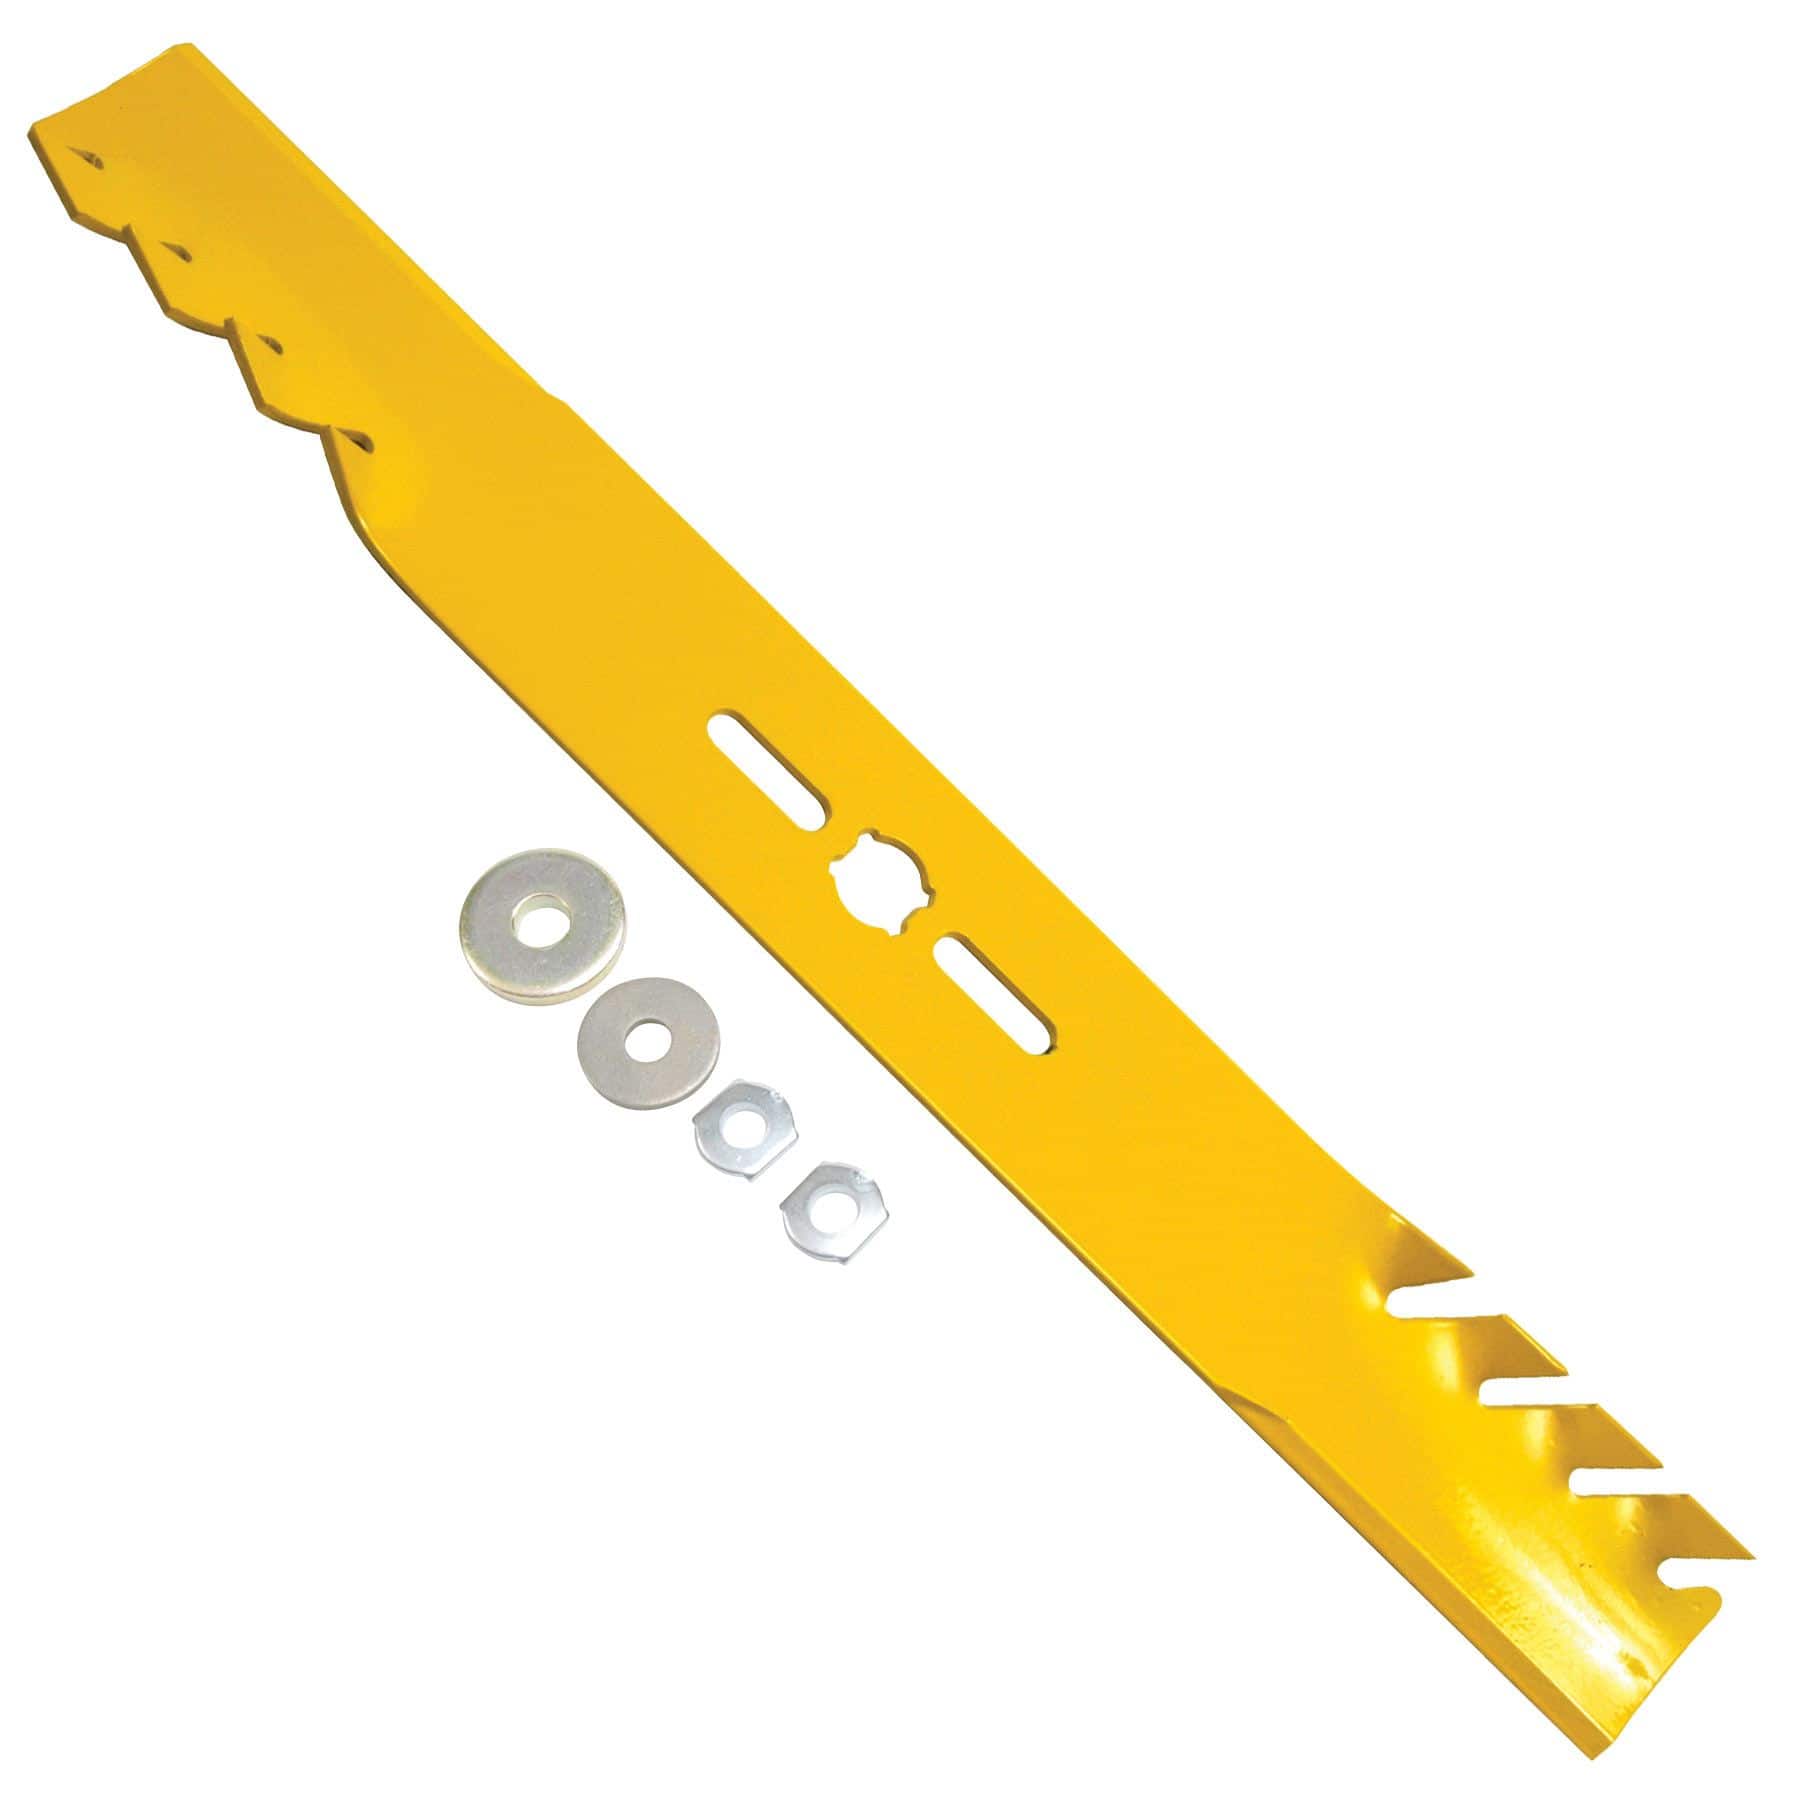 Extreme Universal 3 in 1 Lawn Mower RePlacement Blade, 21-in